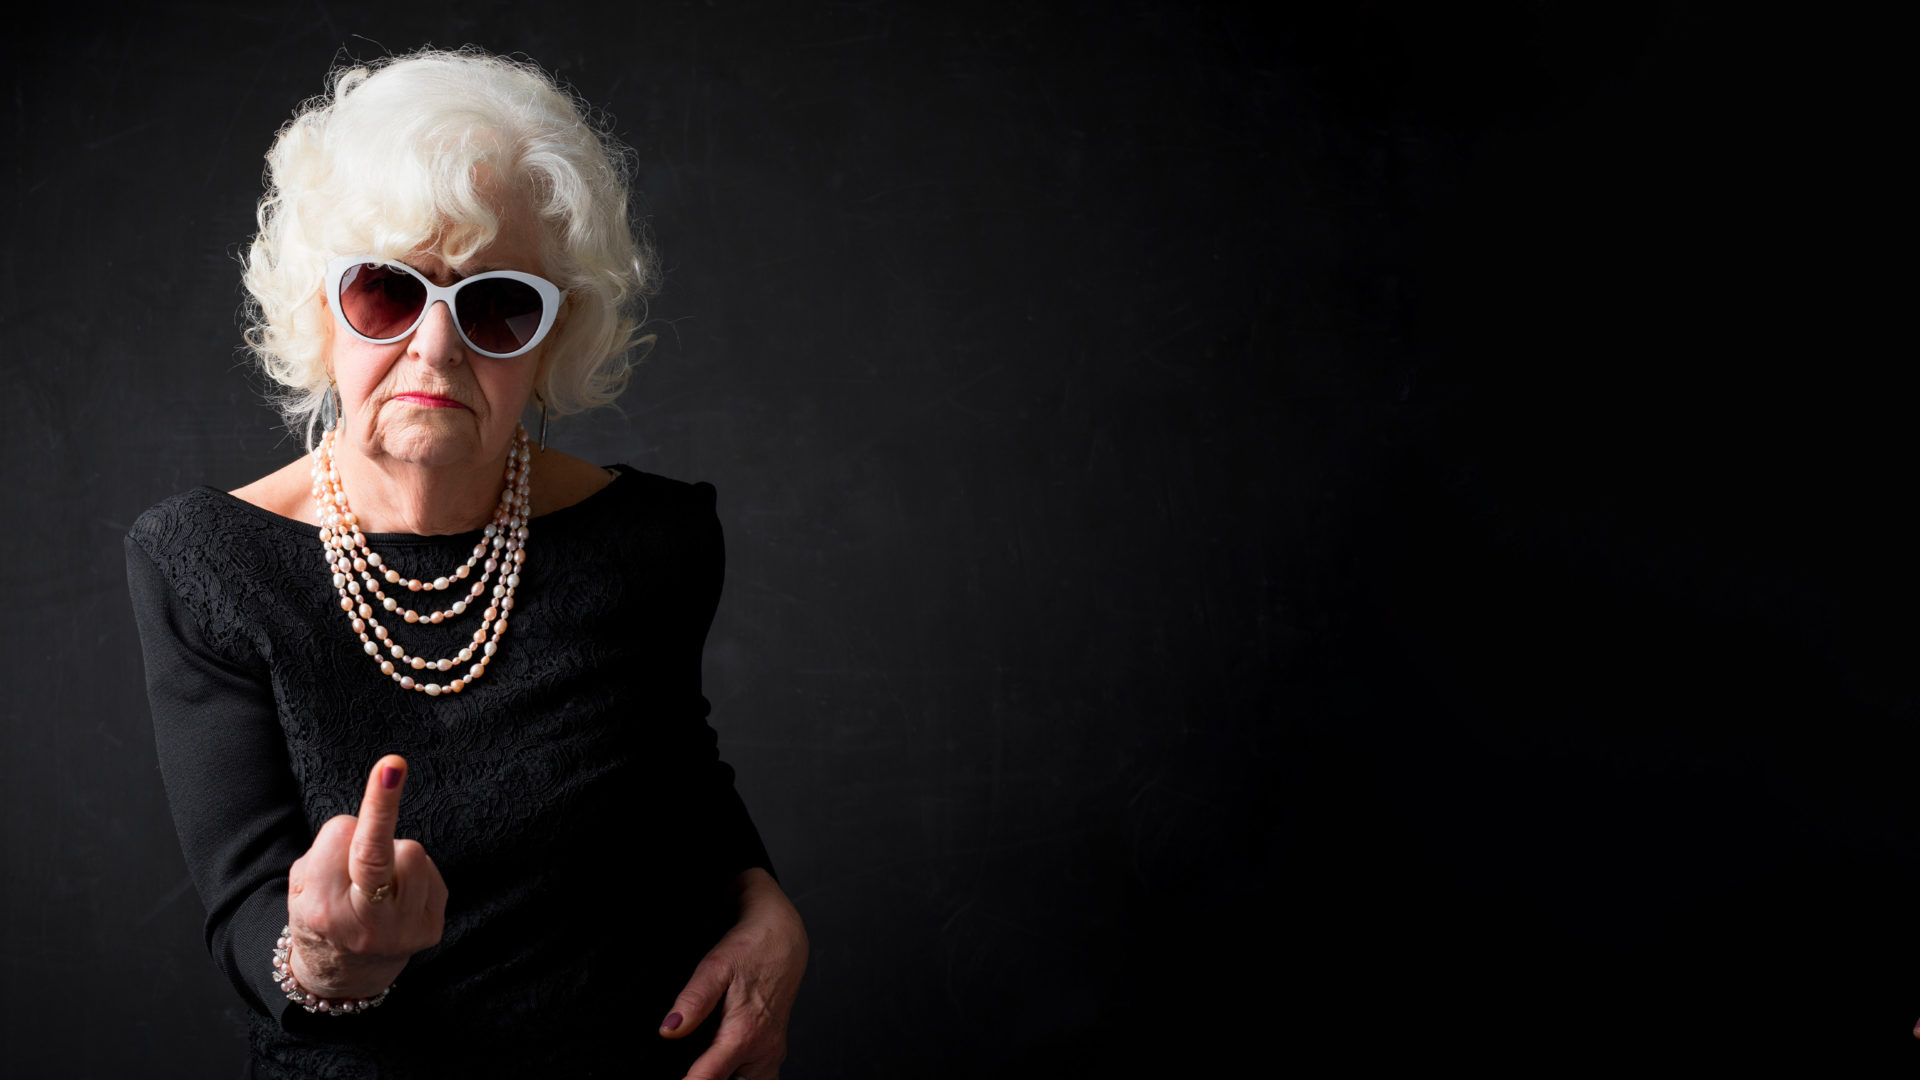 A film poster depicting an elderly woman who is facing the camera and giving the finger. She has short gray hair and she is wearing a black dress, sunglasses and a pearl necklace.